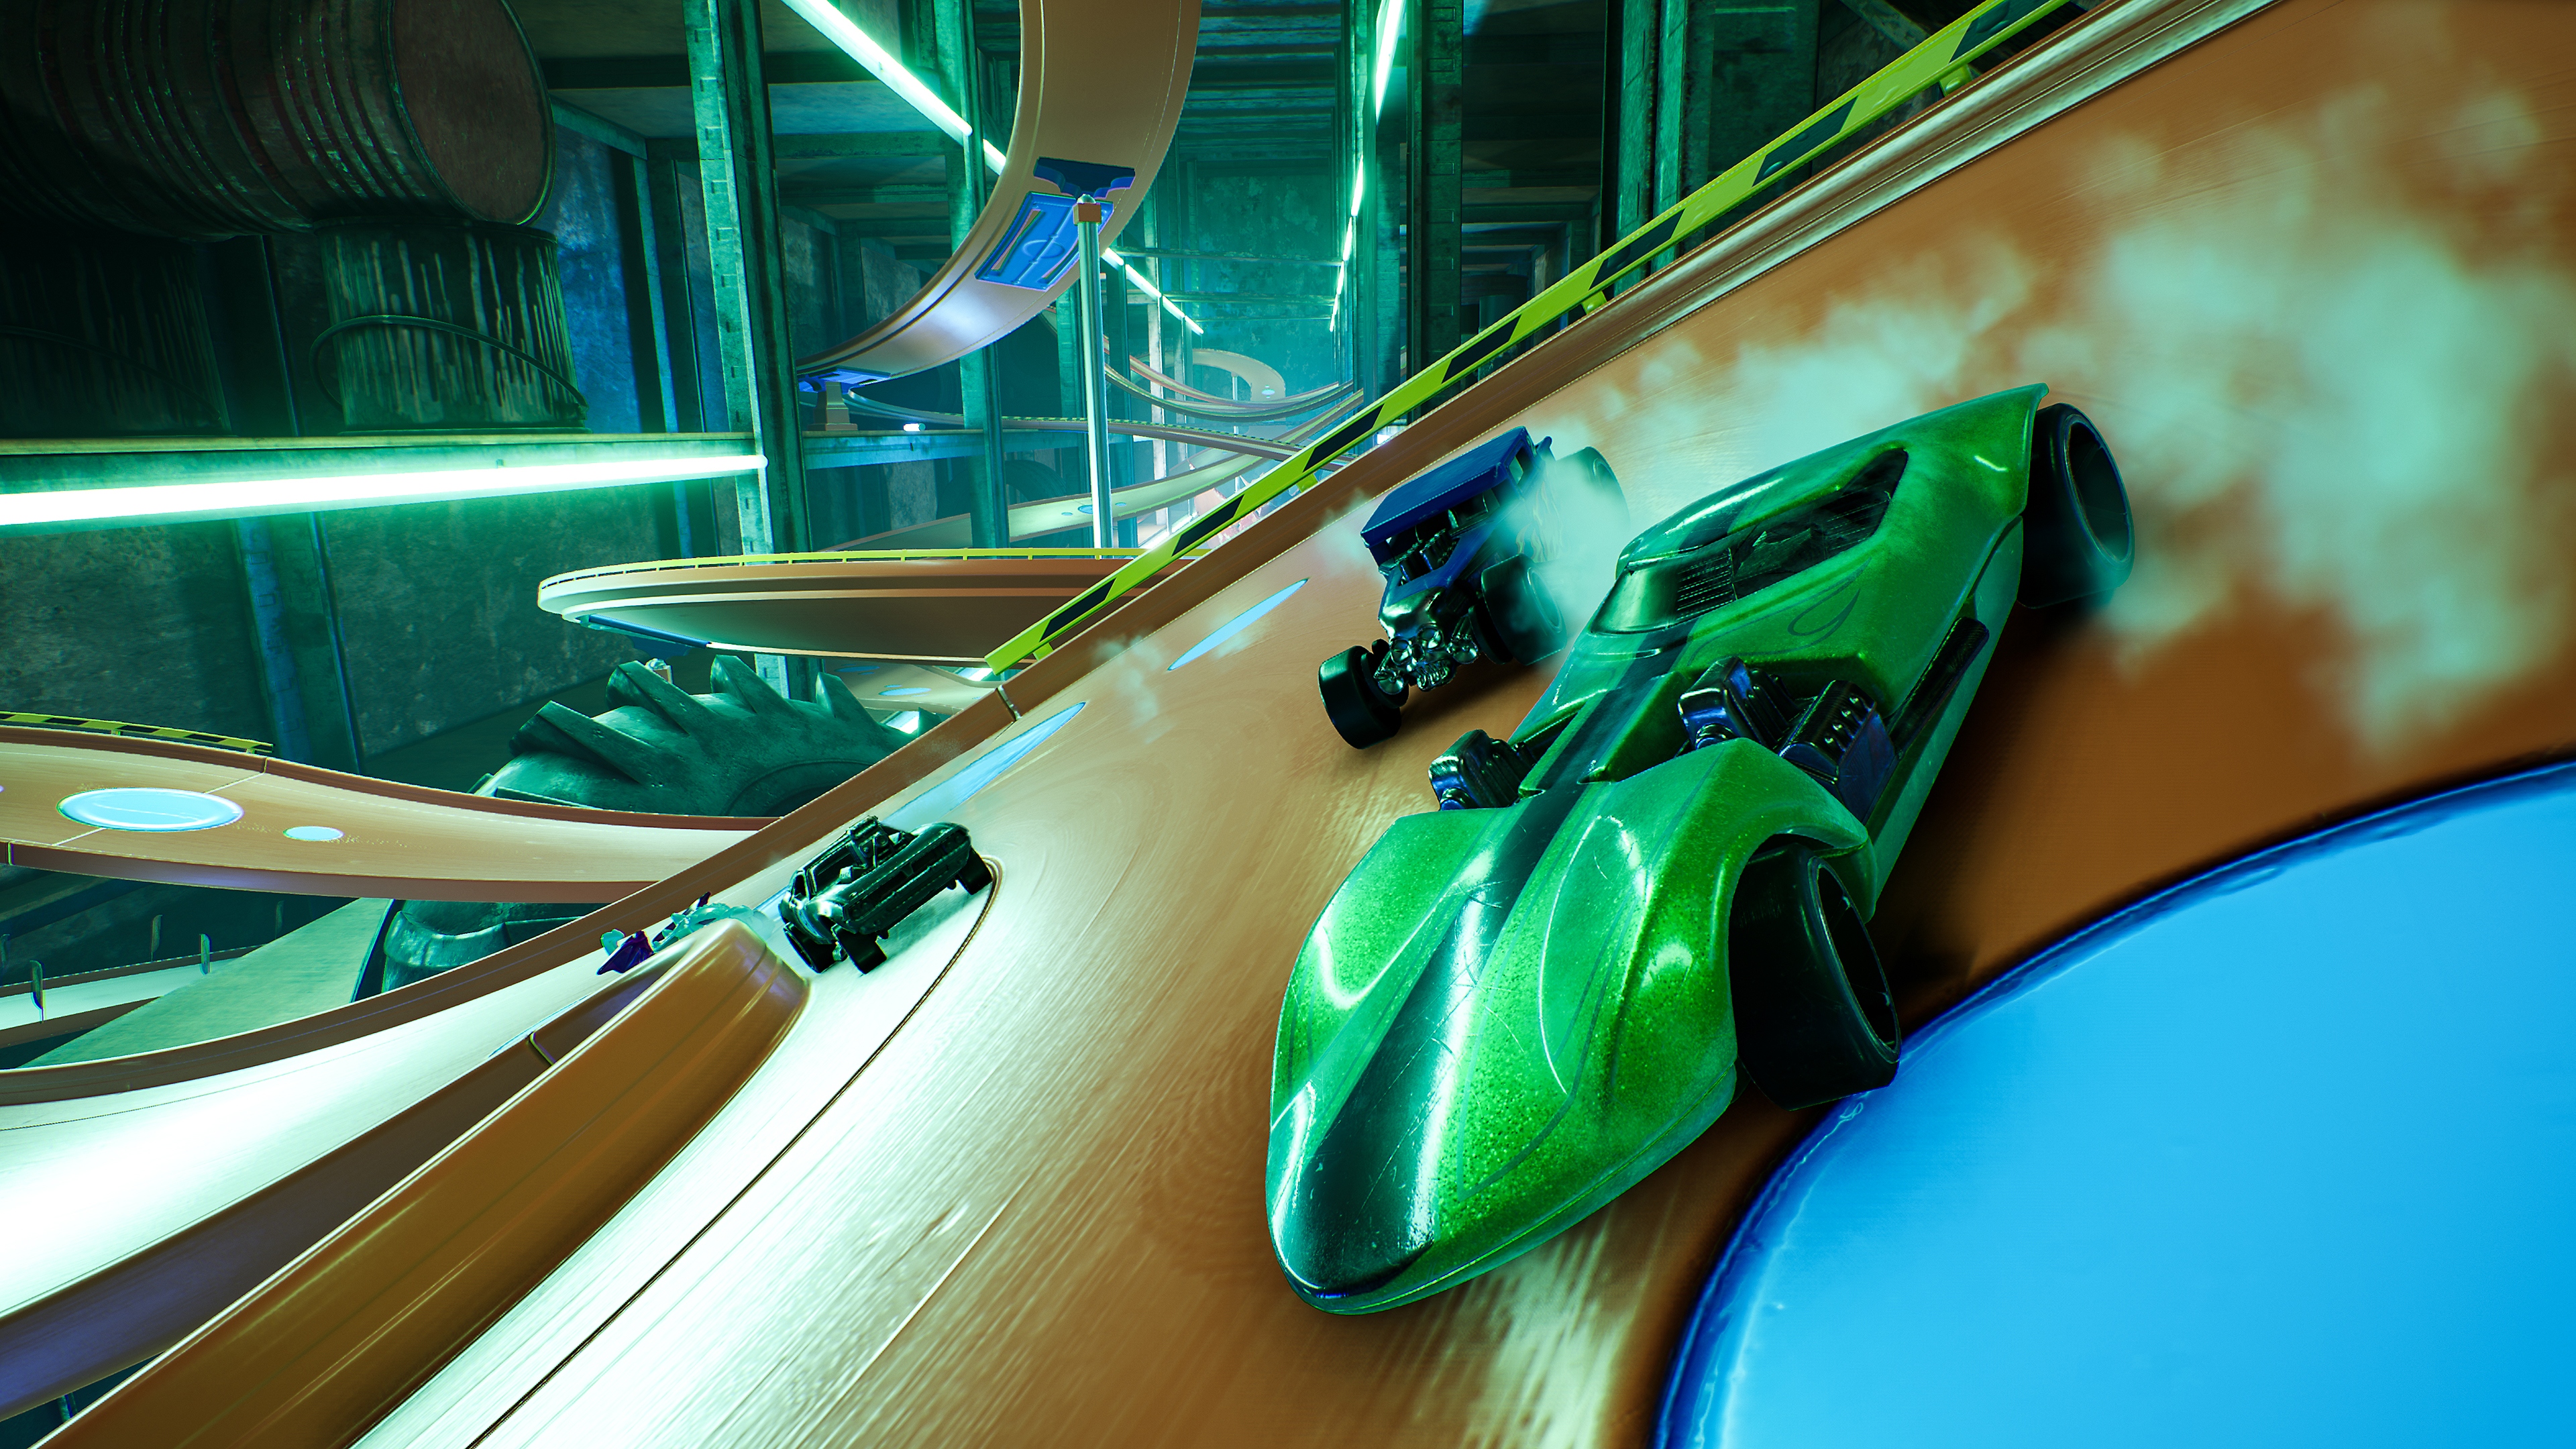 Hot Wheels Unleashed image of cars racing with track in the background.